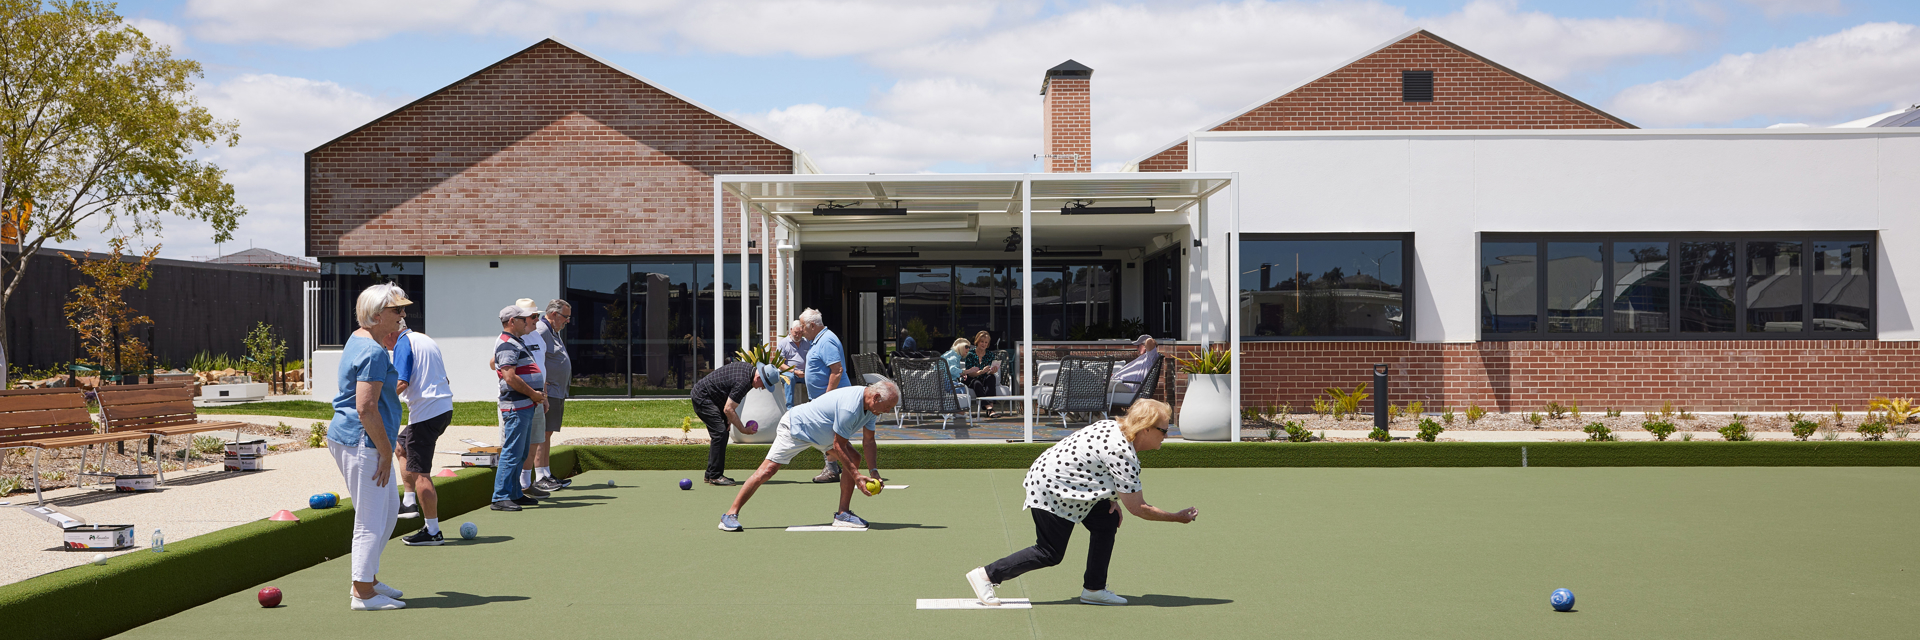 Homeowners playing lawn bowls at the Halcyon Berwick clubhouse